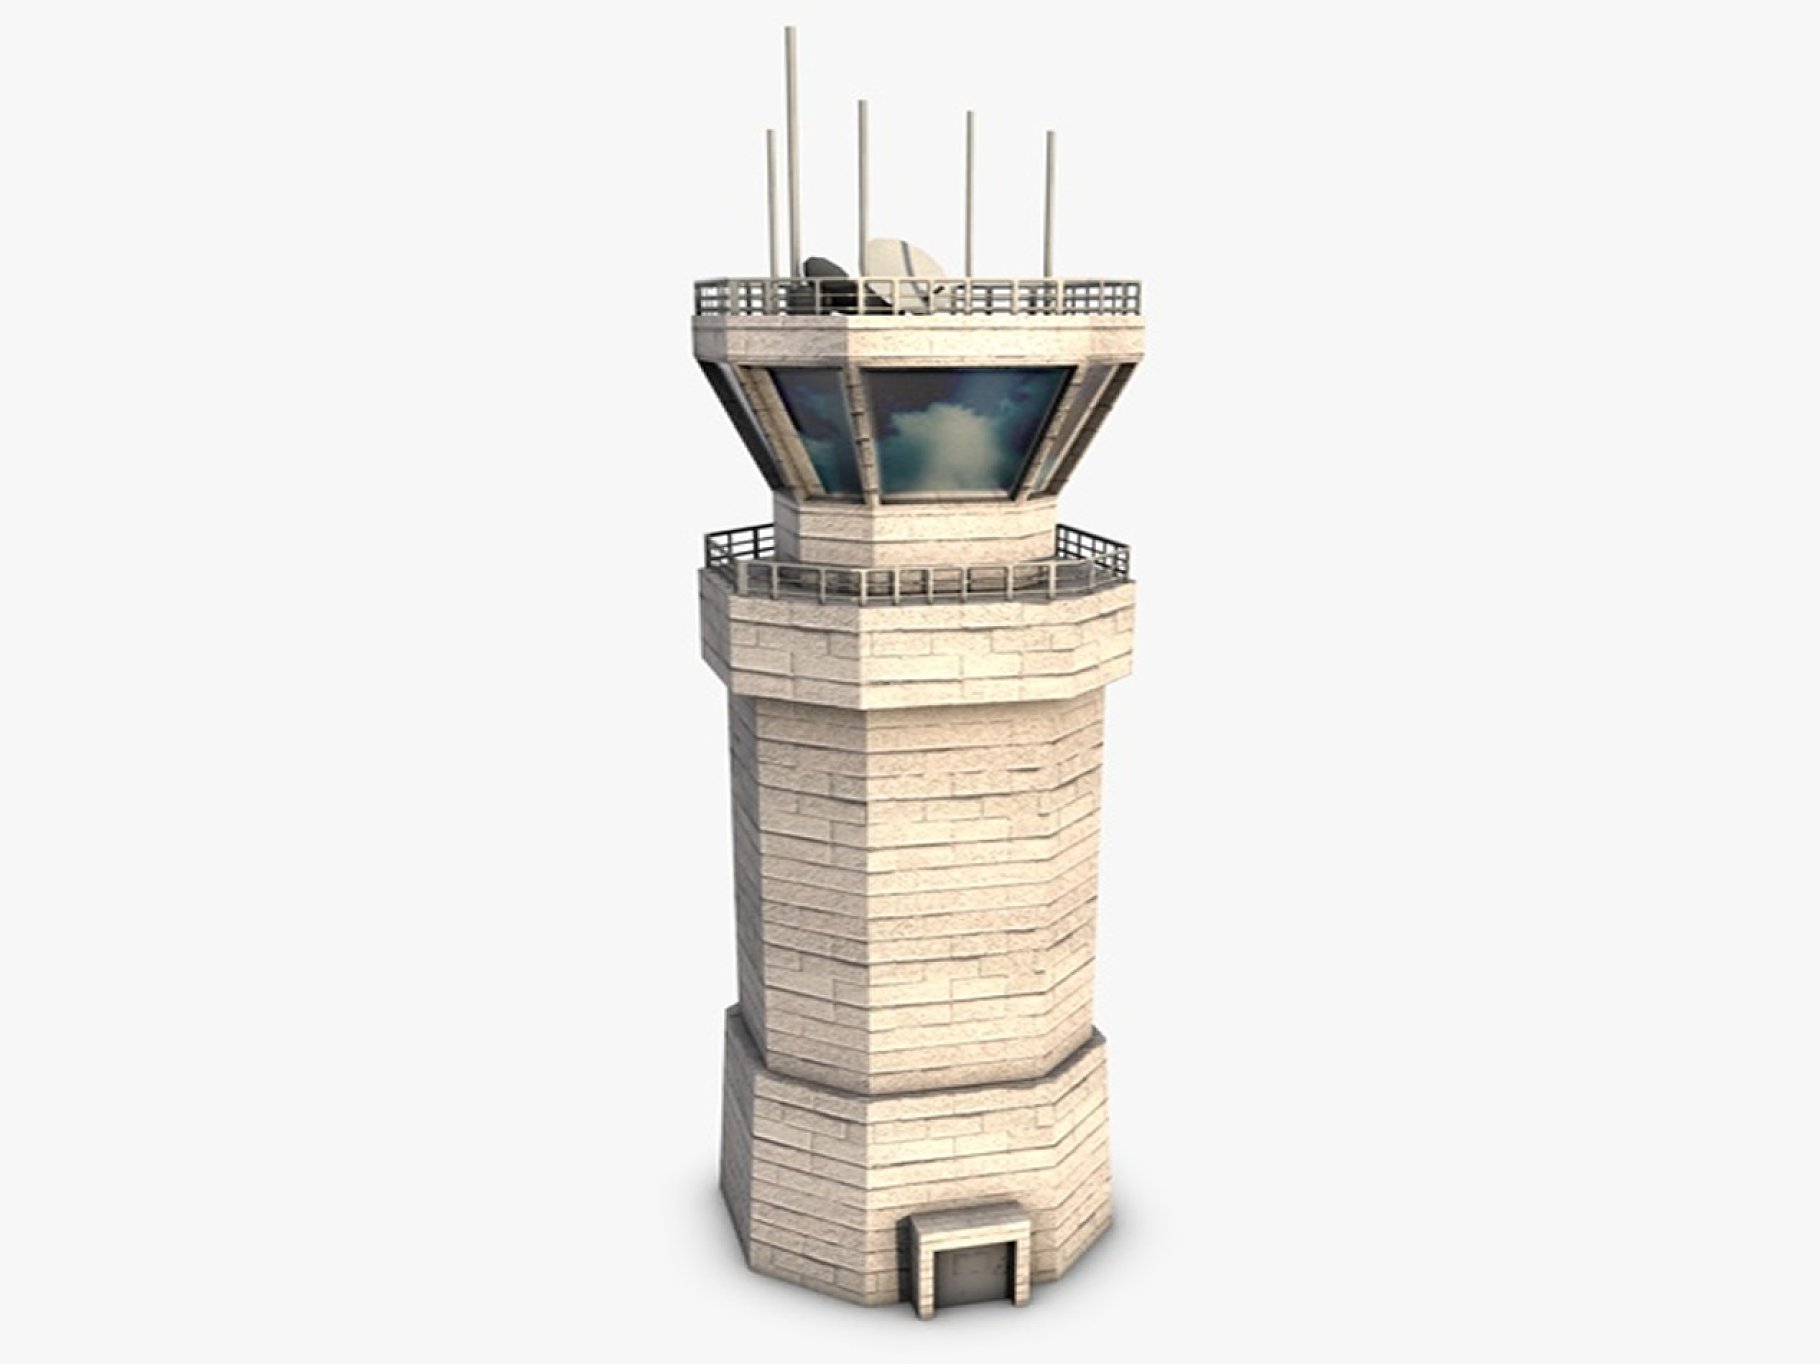 A tower with an observation deck.